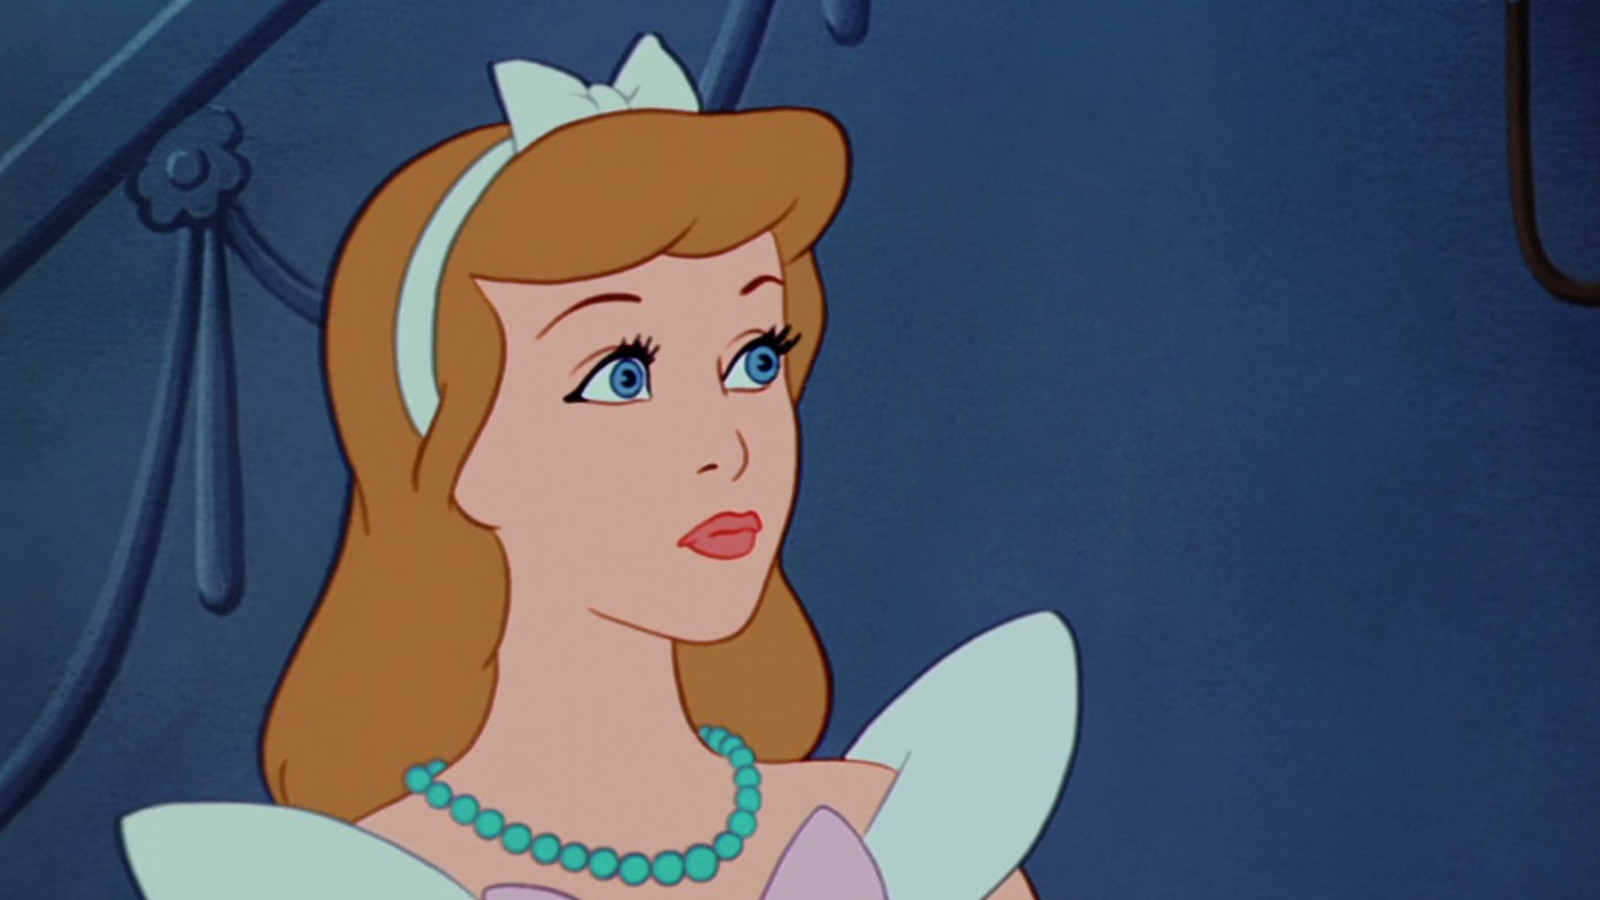 The Success Of Cinderella, Disney Would Have Likely Folded The 1950s